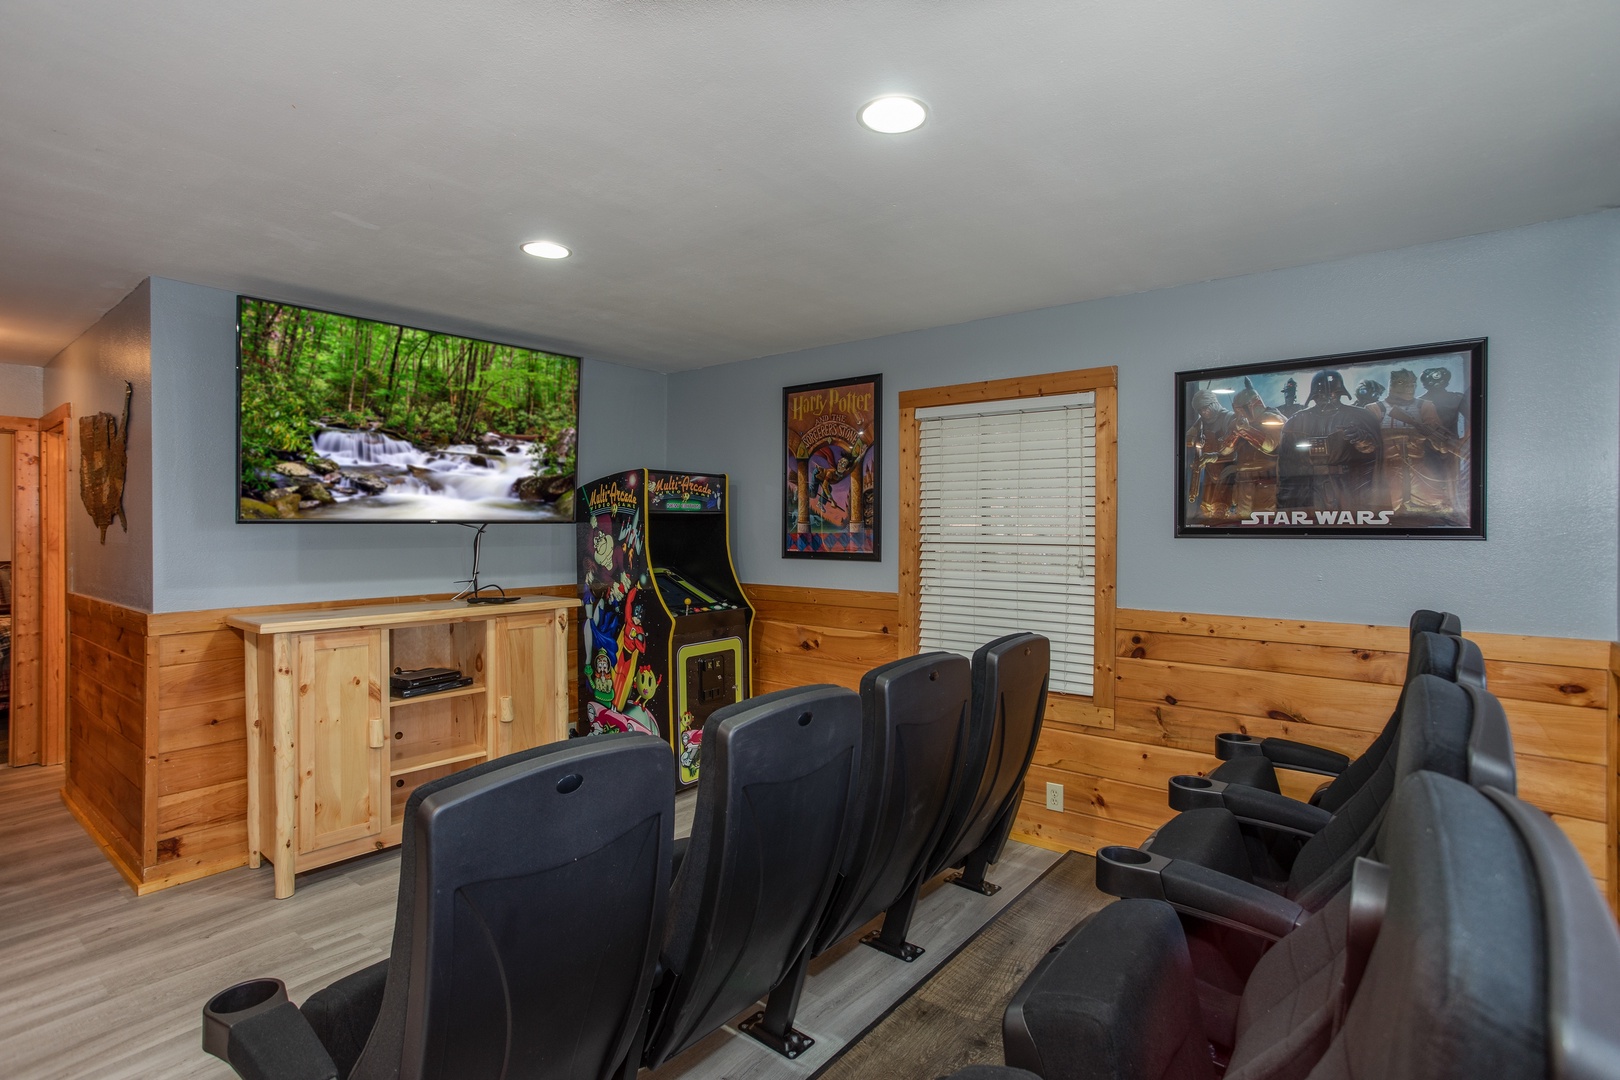 TV and arcade game in the theater room at Mountain Music, a 5 bedroom cabin rental located in Pigeon Forge